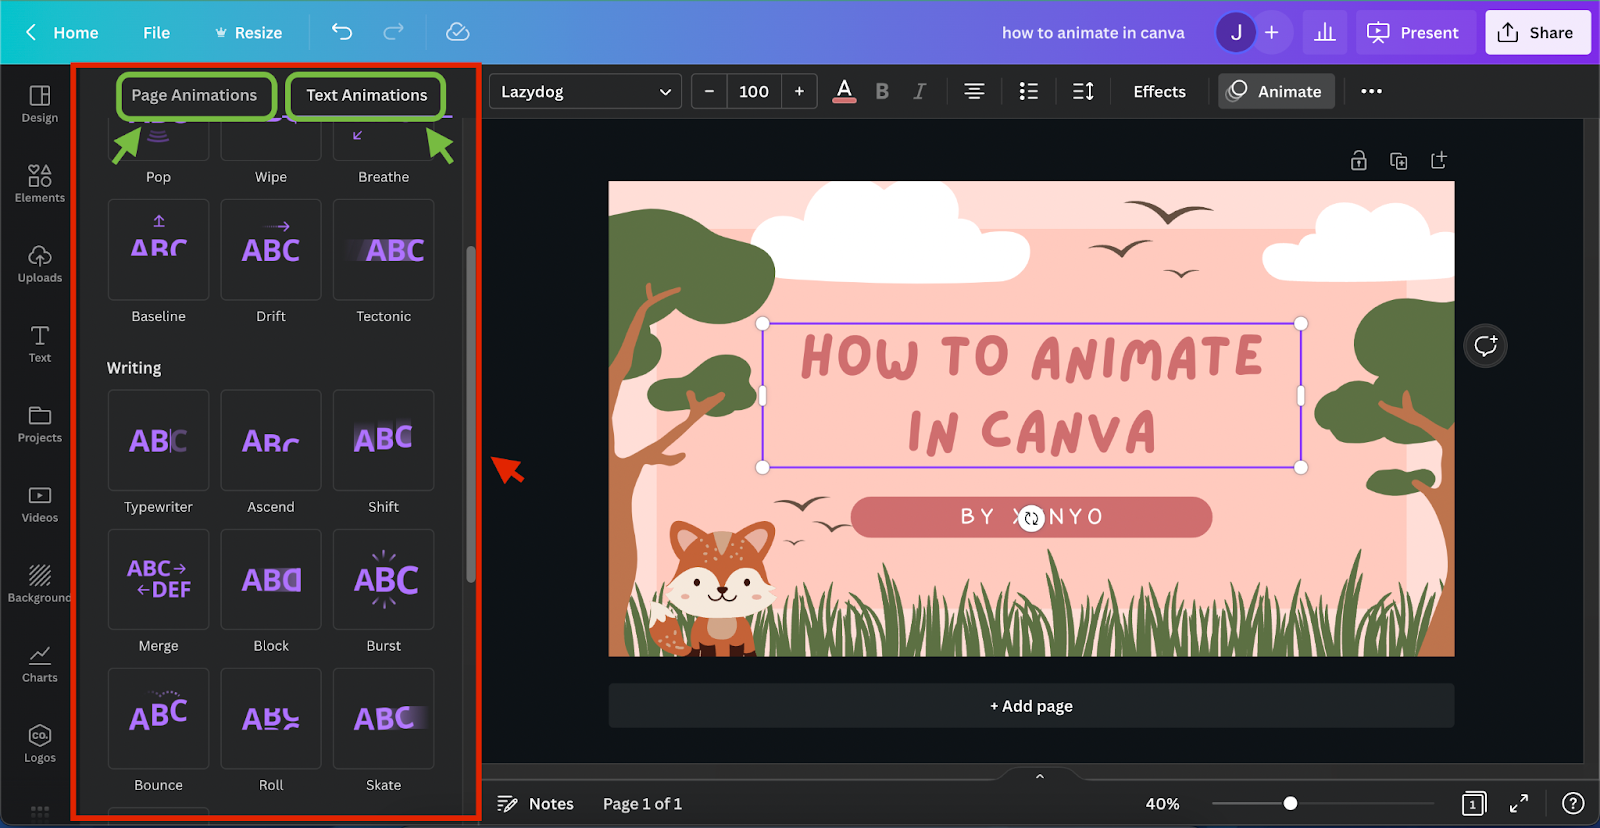 How to animate in Canva - Texts, Images, and even GIFs! | Xenyo